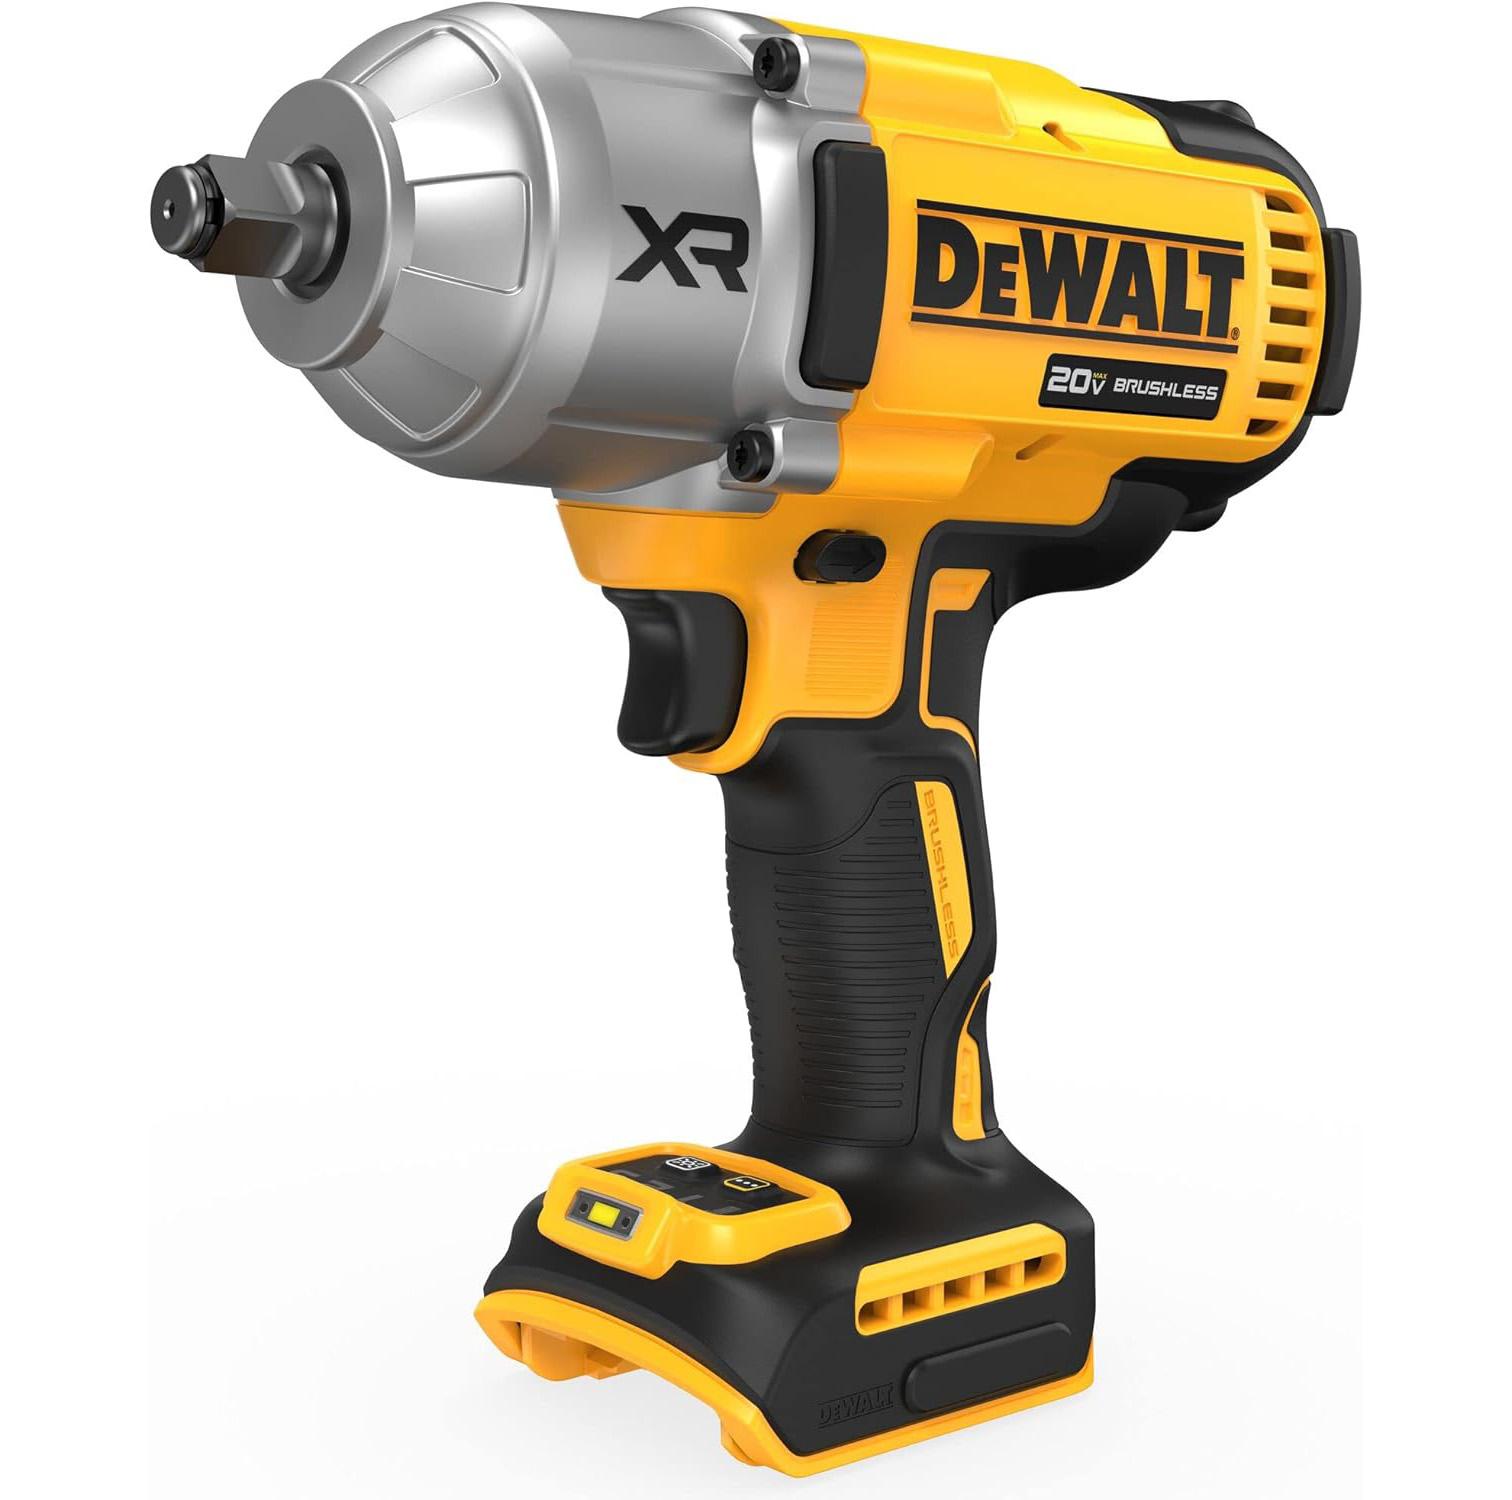 Dewalt 20v Max Cordless Impact Wrench for $211 Shipped